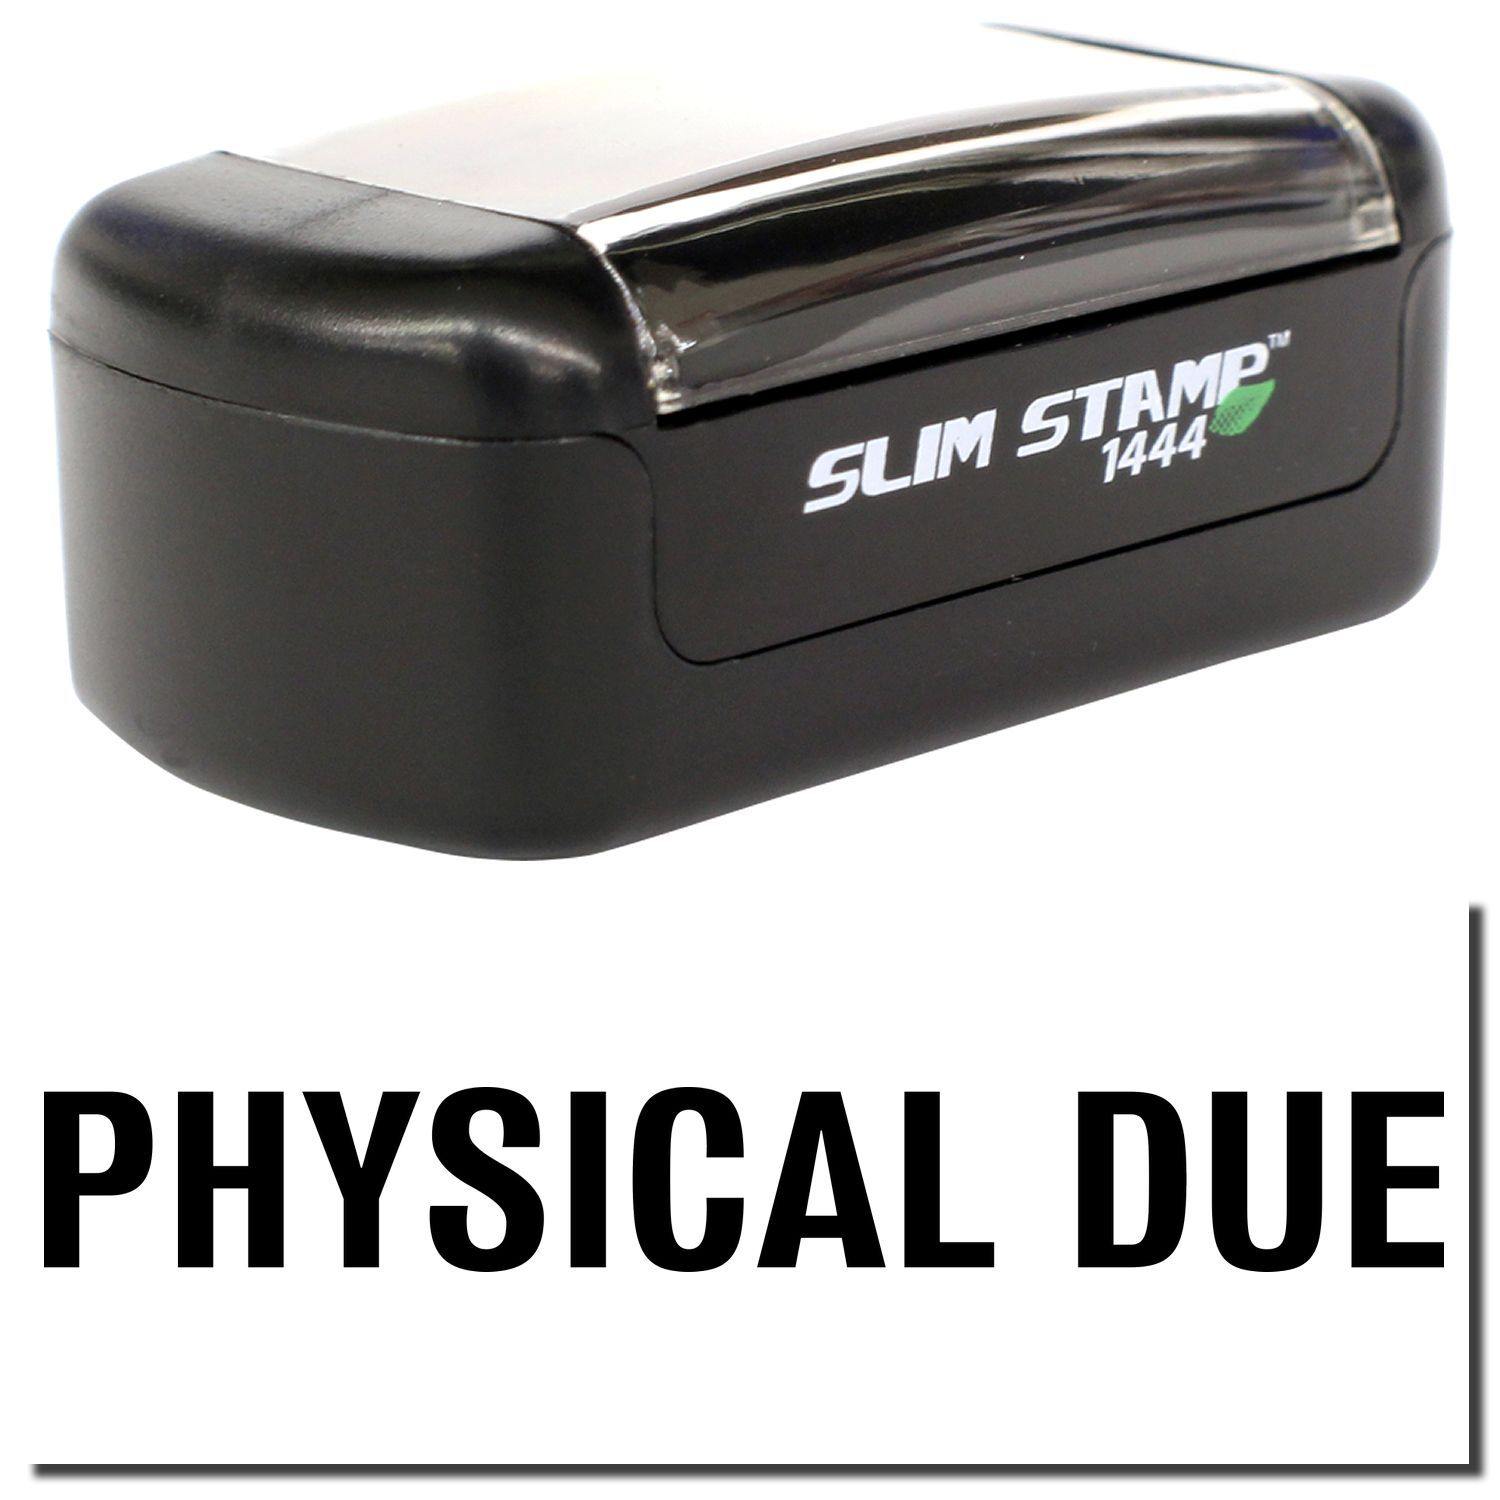 A stock office pre-inked stamp with a stamped image showing how the text "PHYSICAL DUE" in bold font is displayed after stamping.